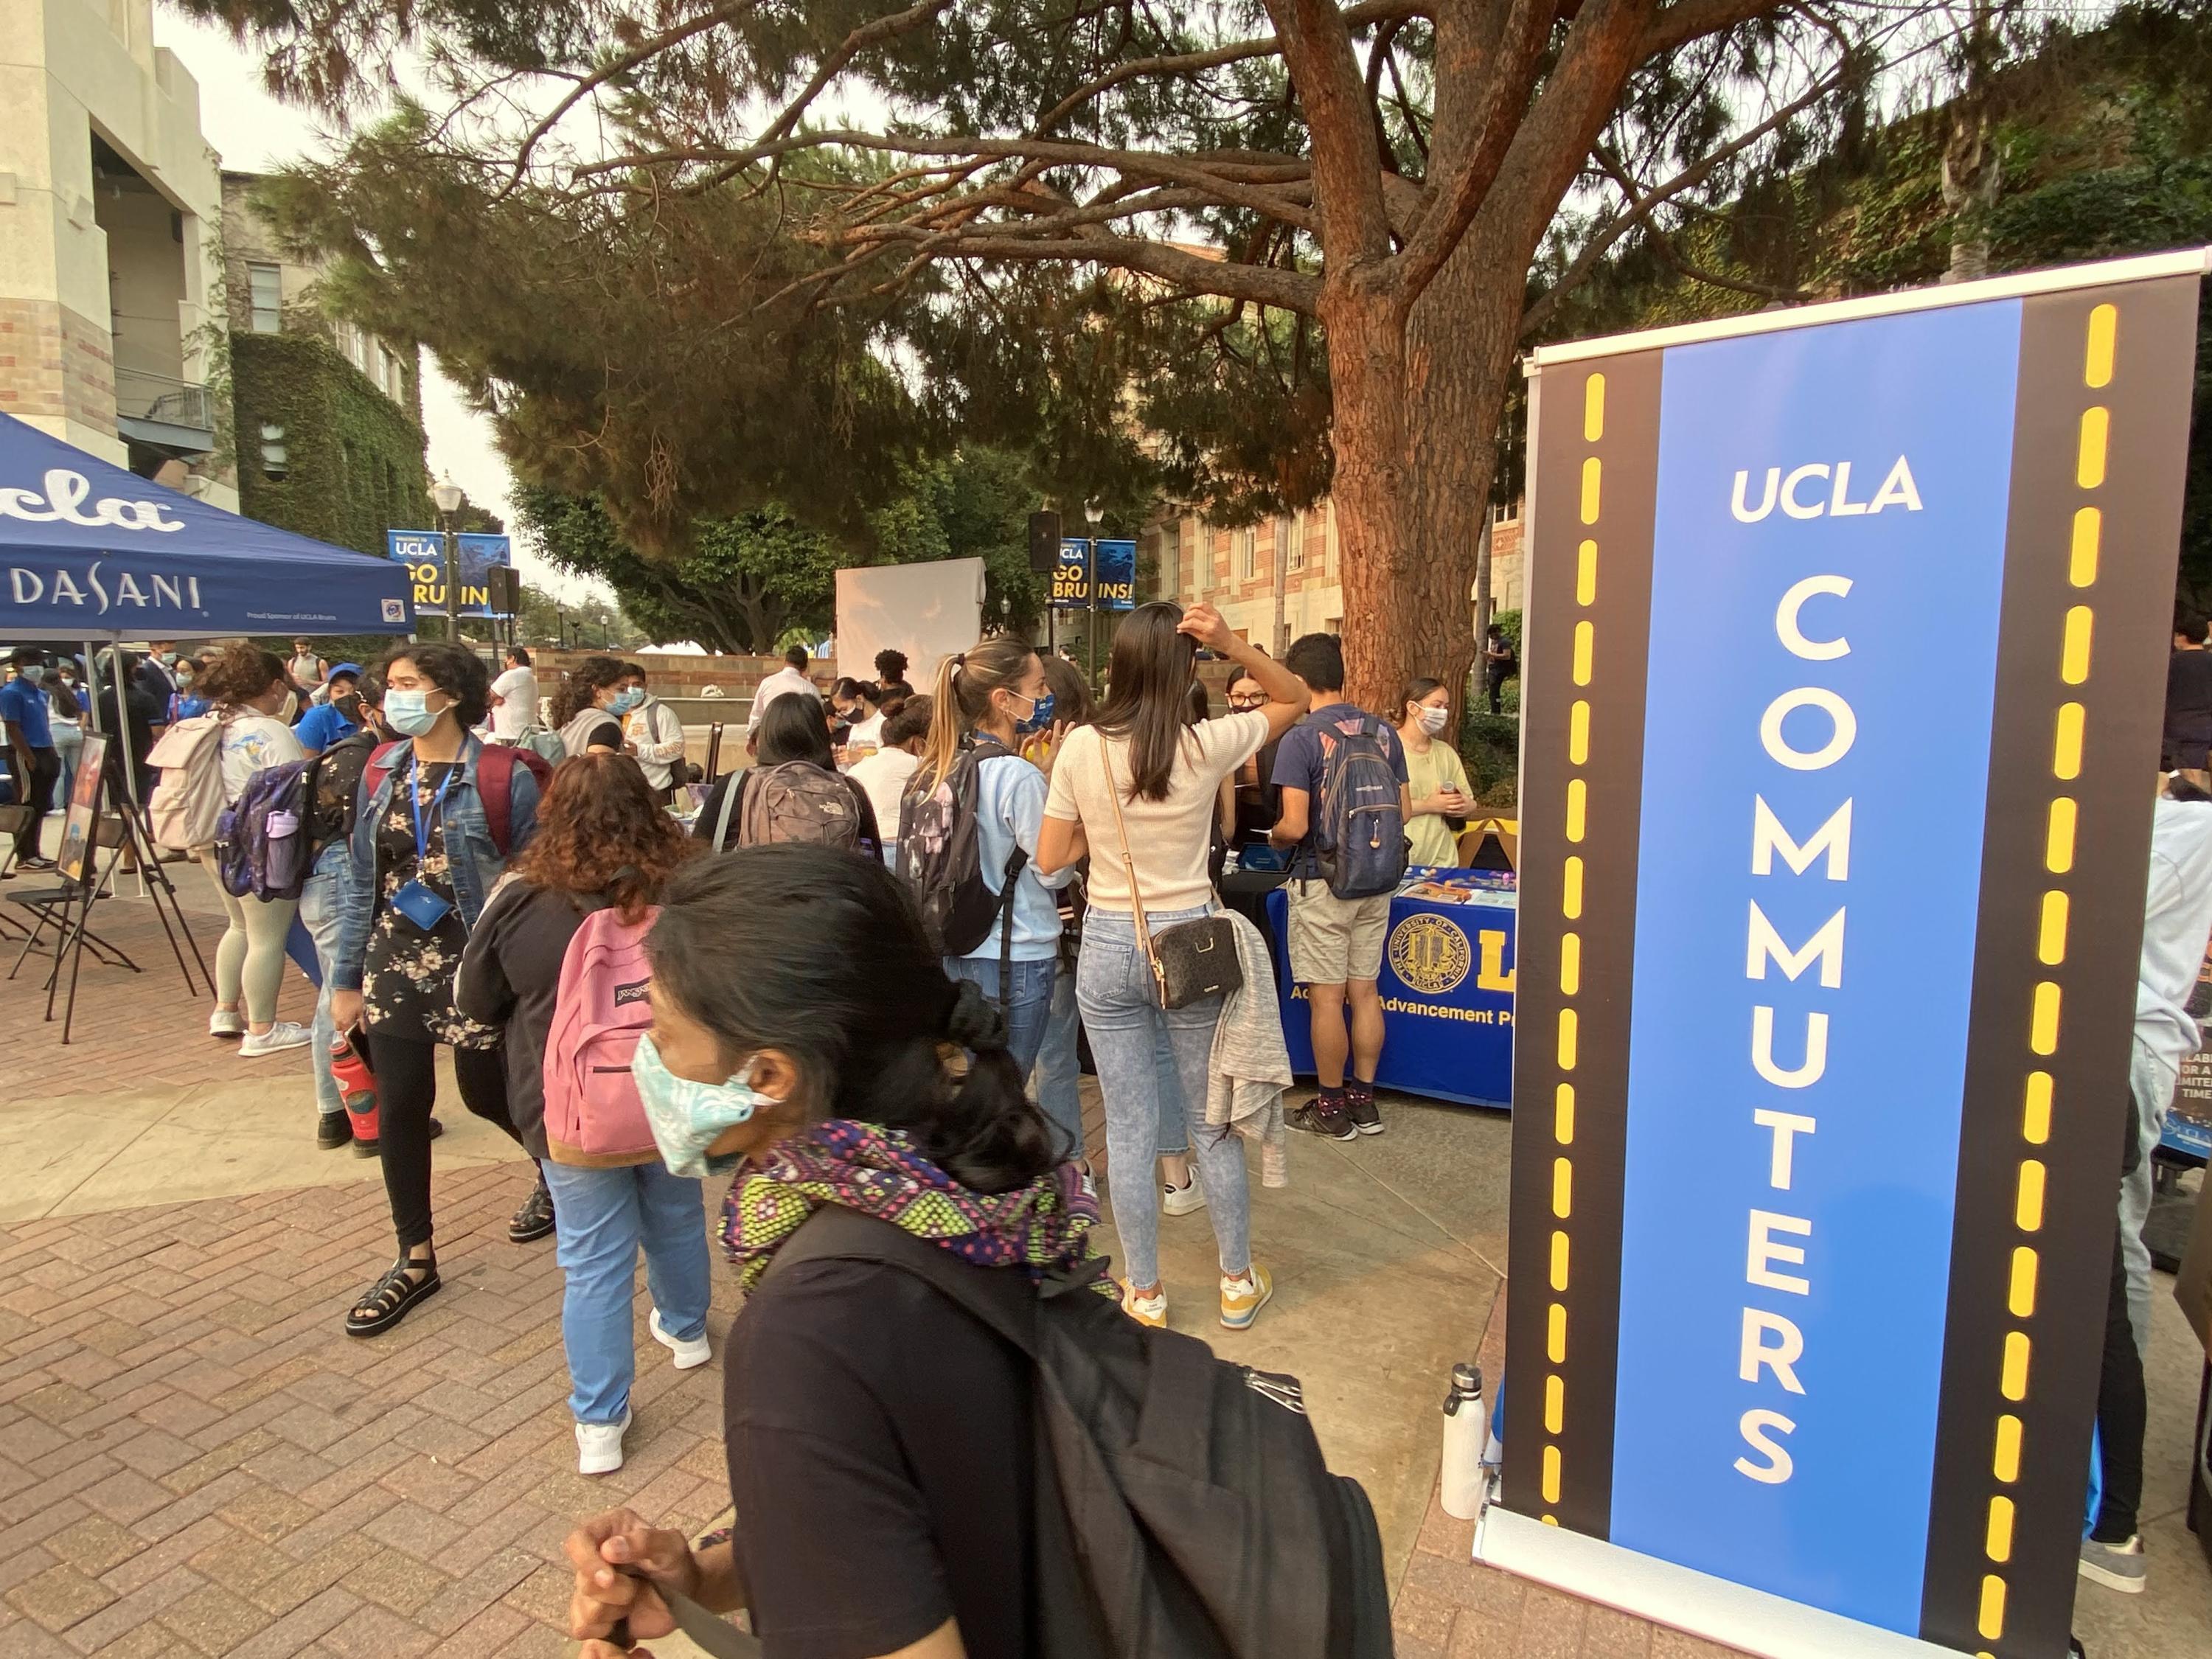 Campus Resource Fair with the Commuter Support & Programs booth